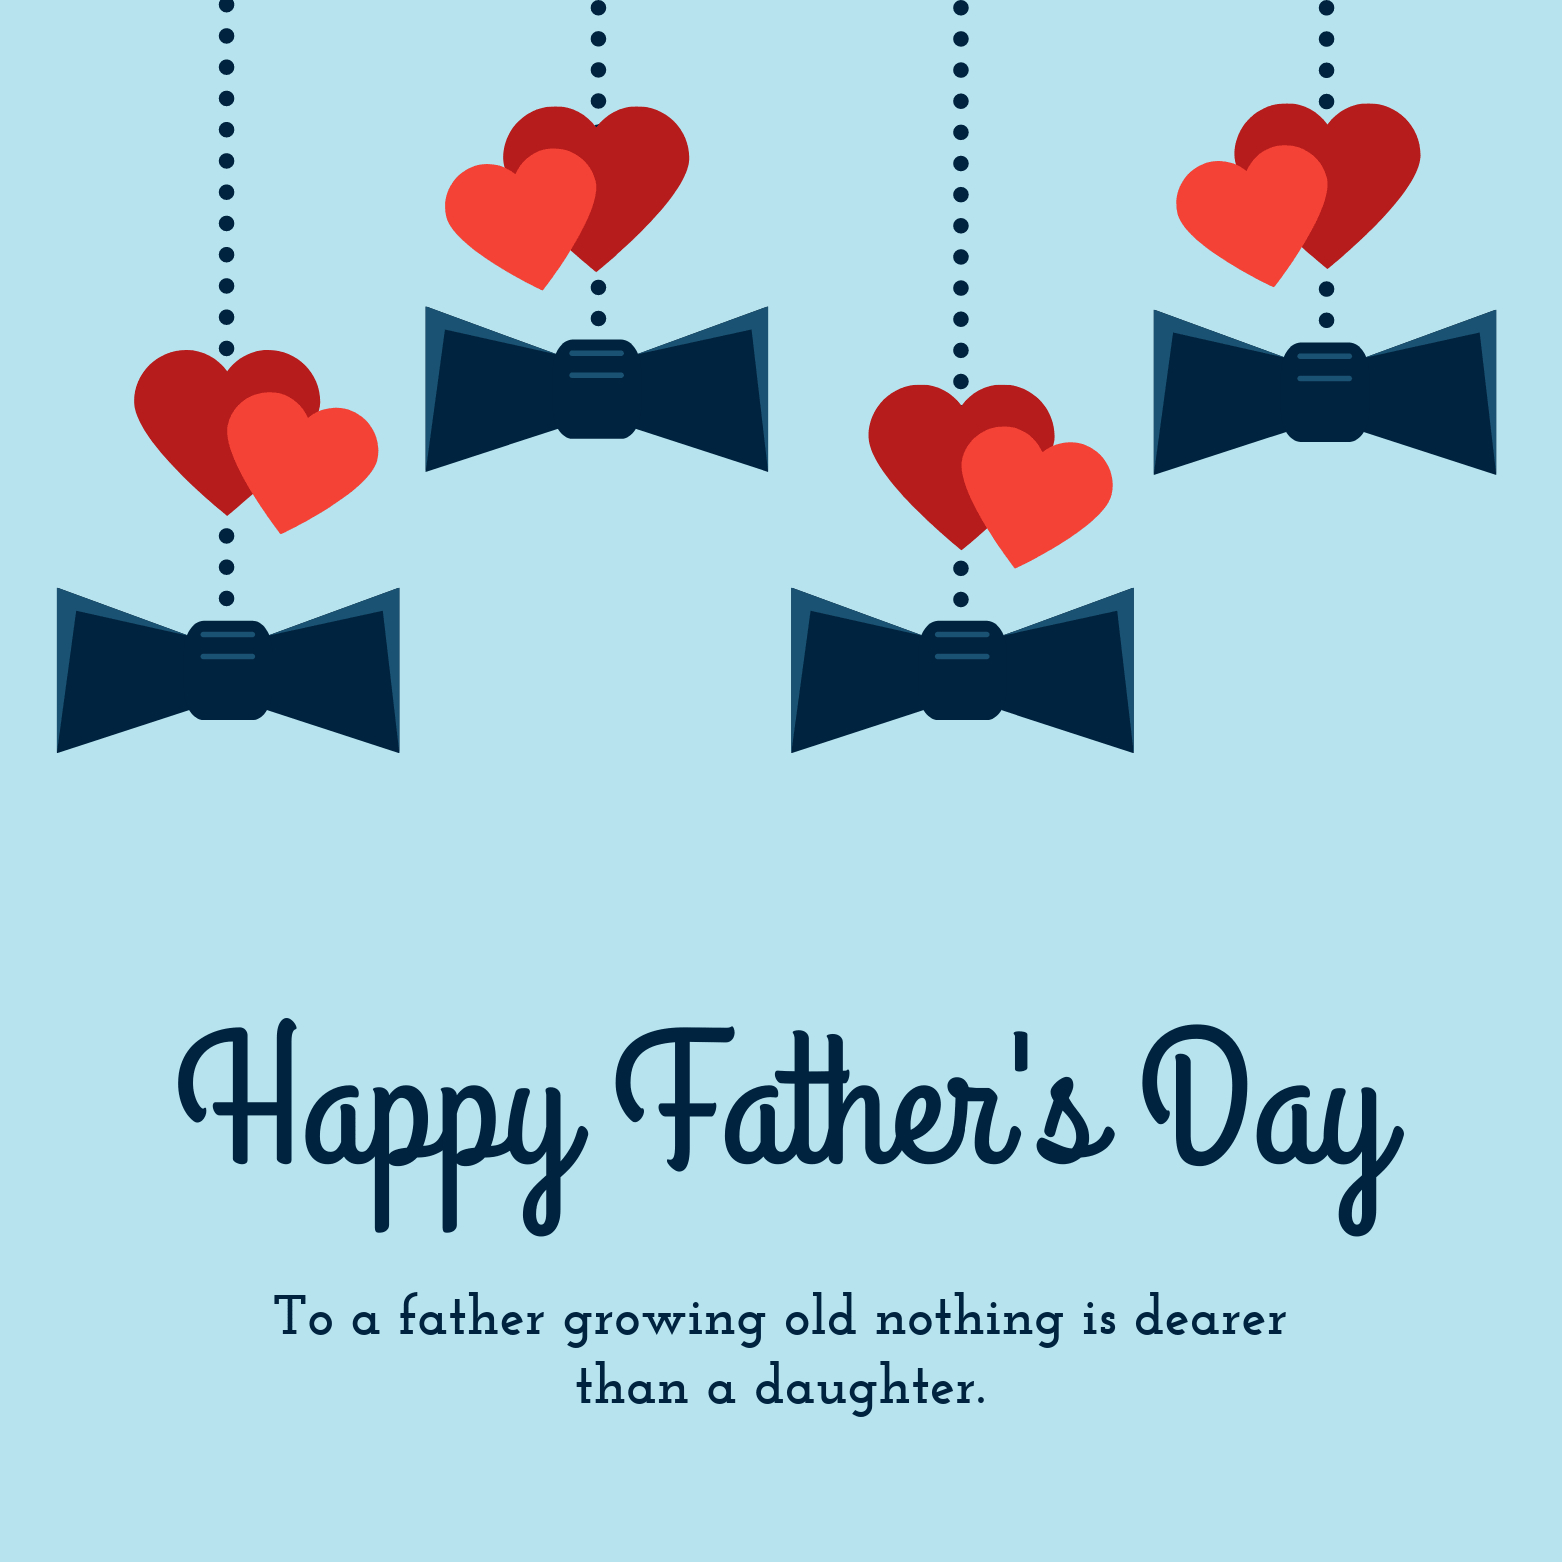 15+ Fun Father's Day Card Templates To Show Your Dad He's #1 Throughout Fathers Day Card Template